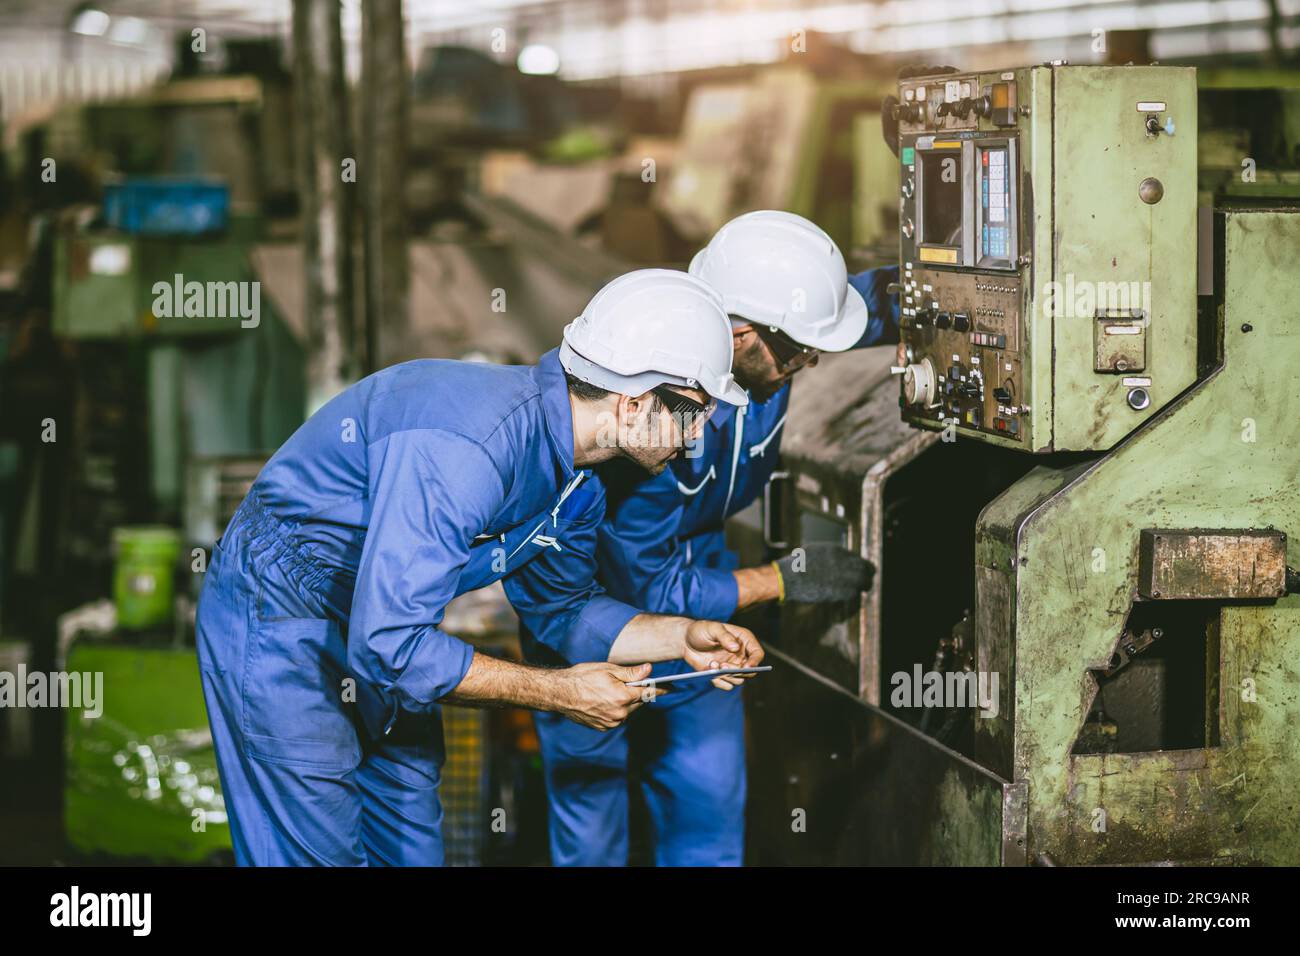 lathe technician engineer worker service team check maintenance milling head lathe CNC machine in heavy metal industry factory Stock Photo